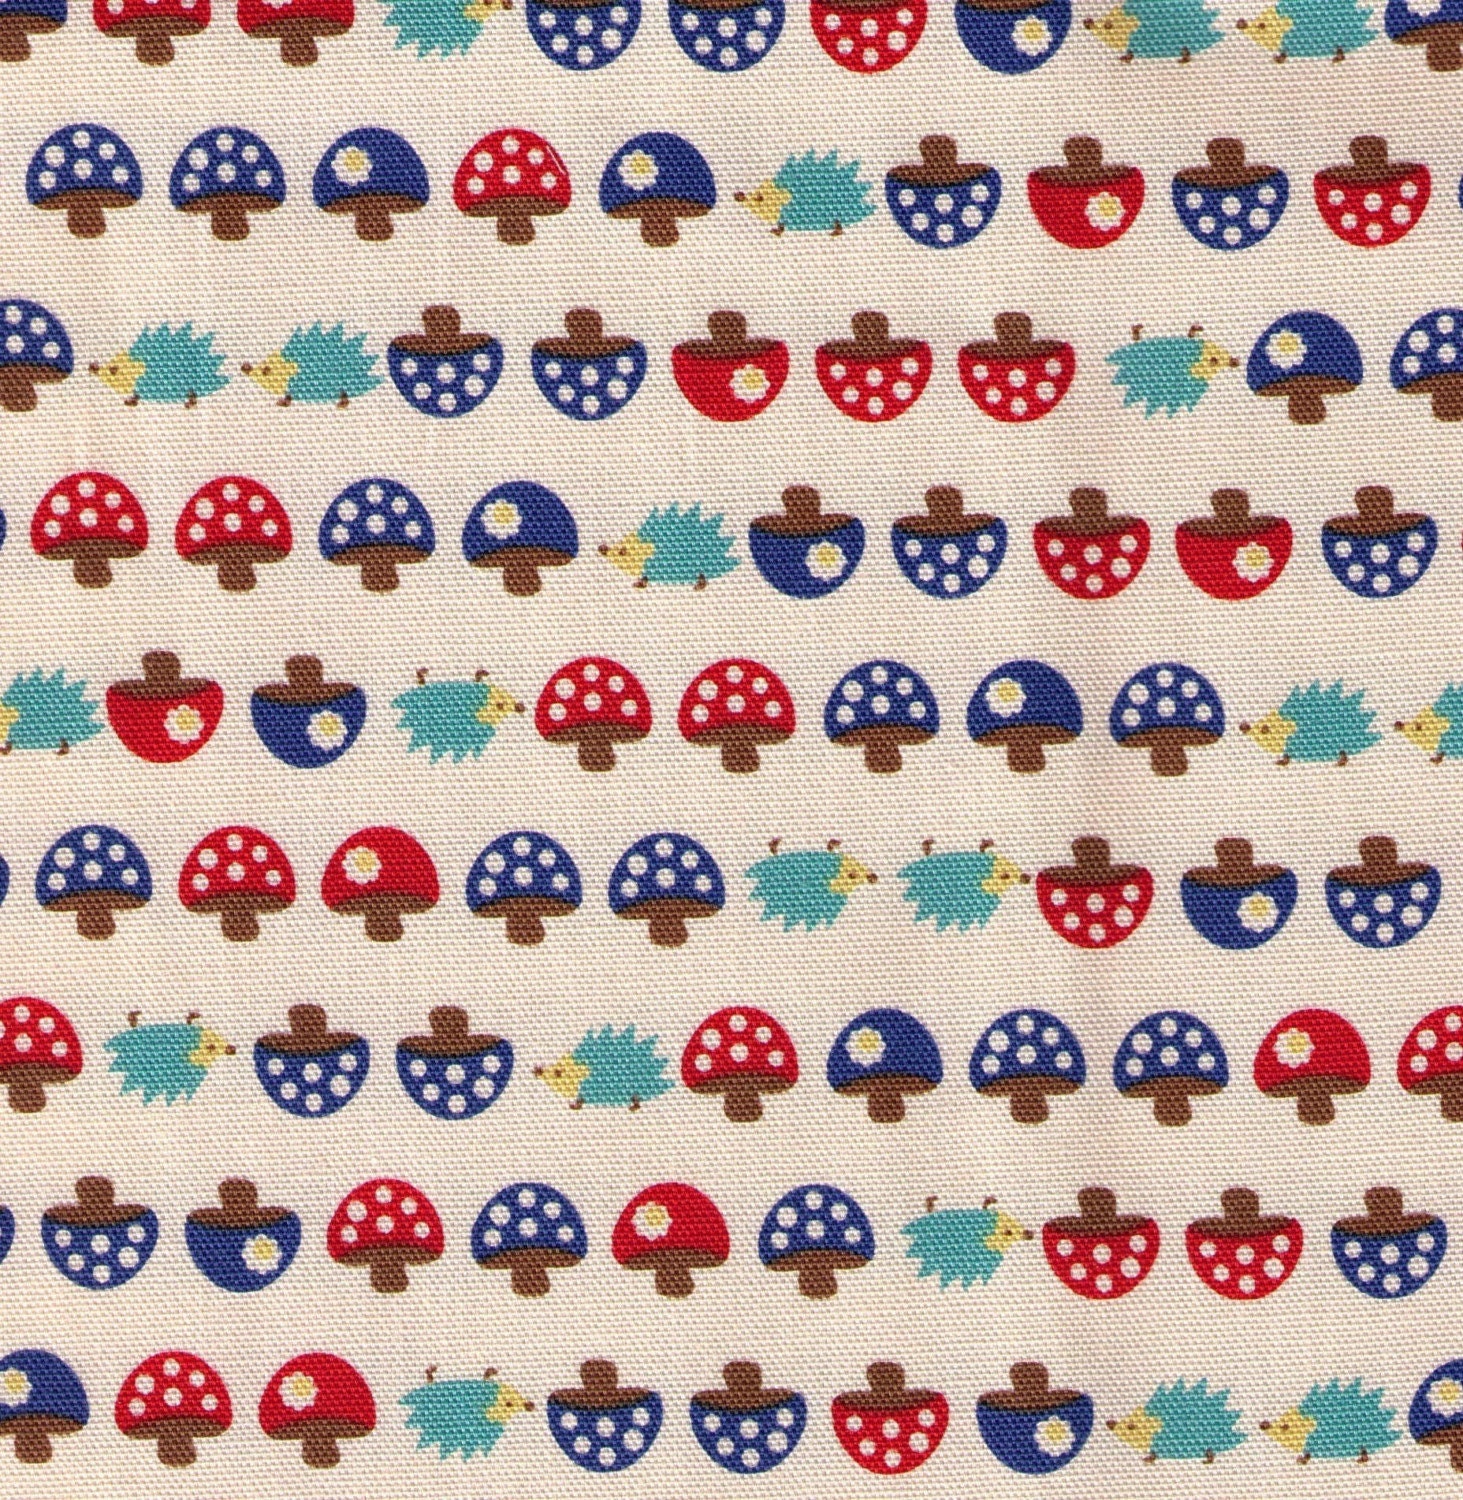 FAT QUARTER Kokka Fabric - Hedgehogs and Toadstools in a row - Japanese Import Fabric